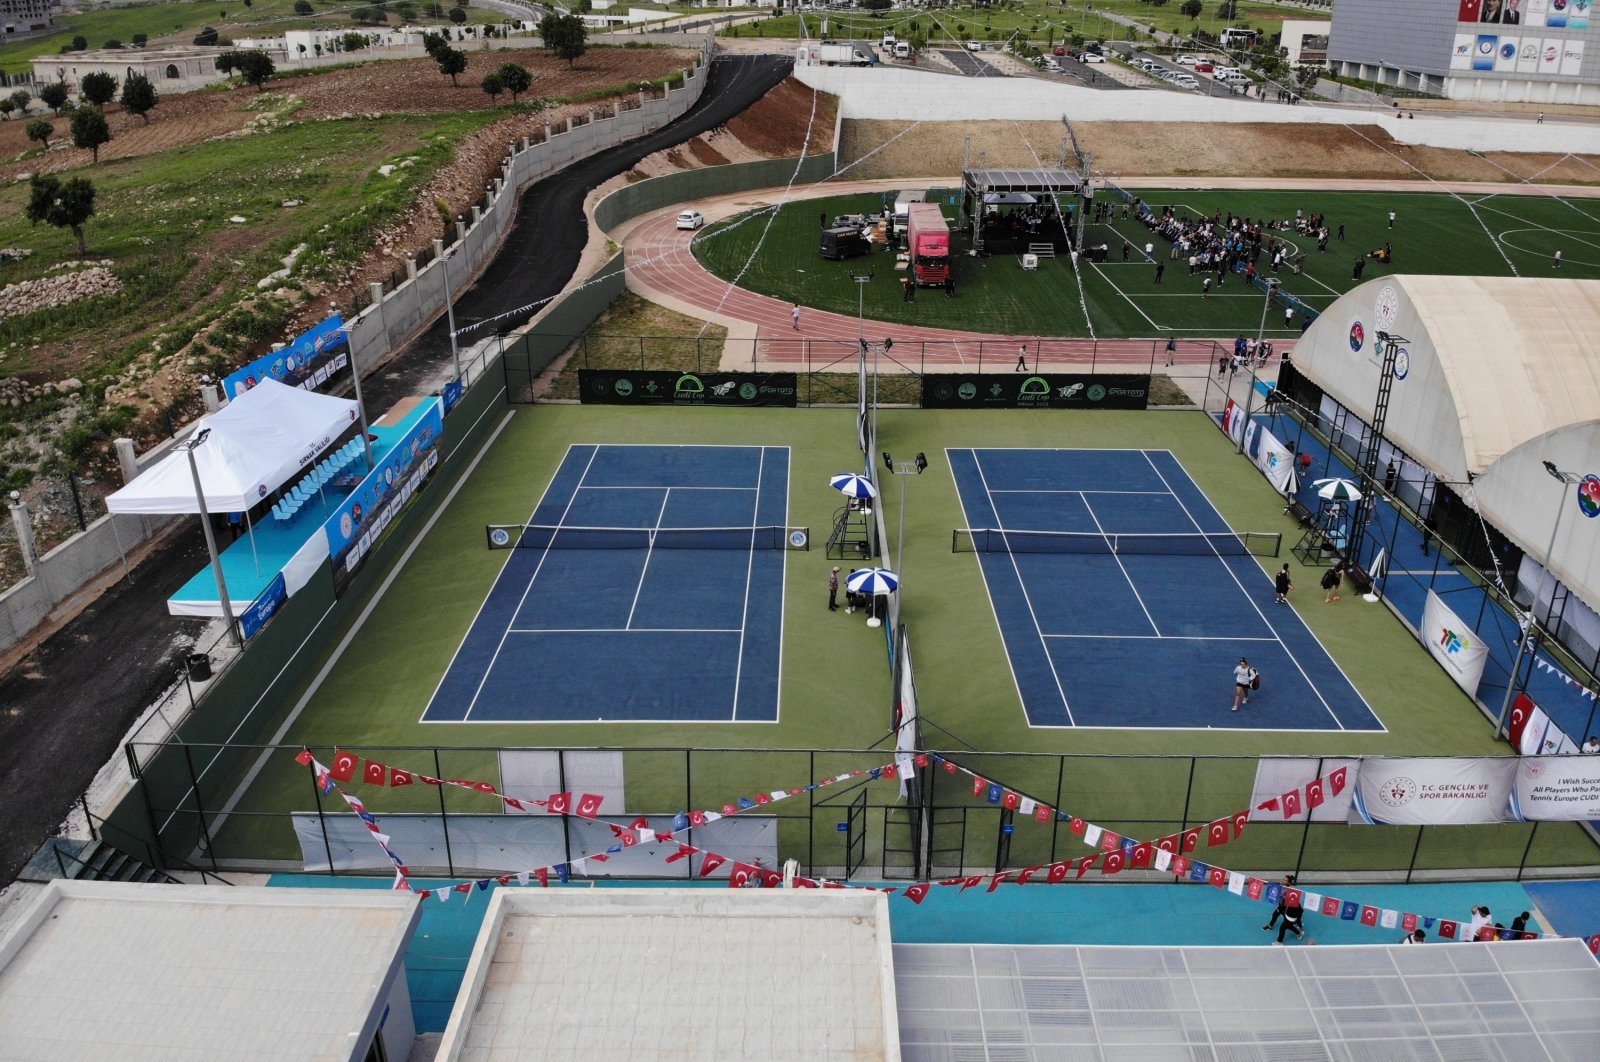 A general view of tennis courts at the Cudi Cup international t, Şırnak, Turkey, May 17, 2022. (AA Photo)